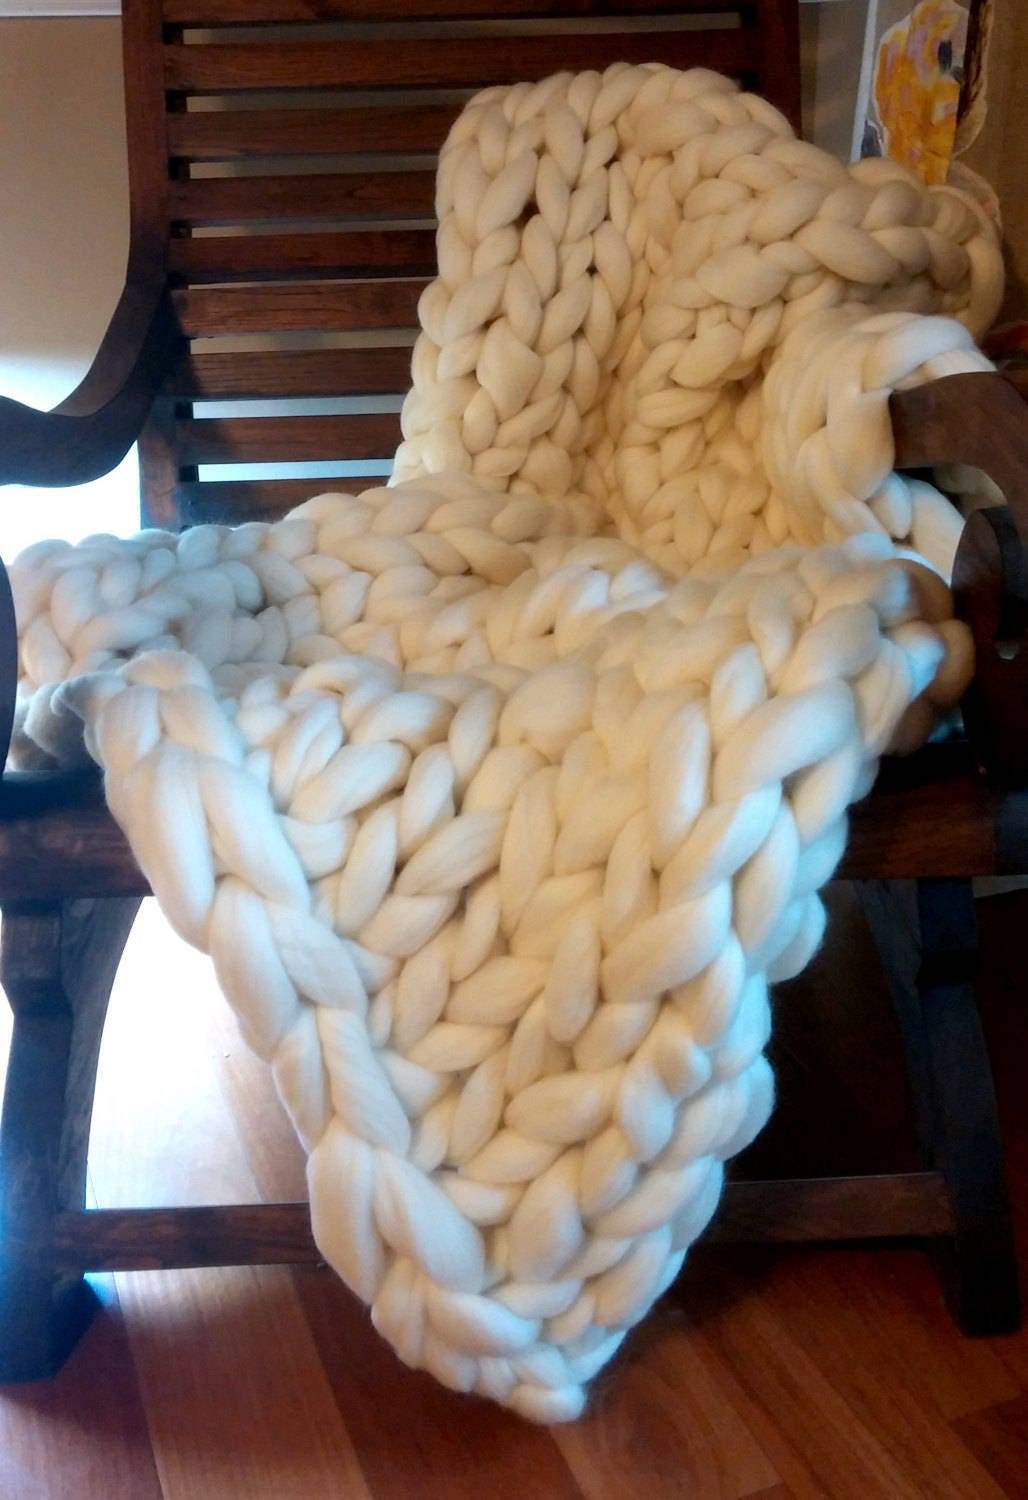 Father's Day Gift! Chunky Knit Blanket, Chunky Knit Merino Wool Blanket Large 40" x 60" Throw Blanket, Giant Knit Blanket,Bulky Knit Blanket